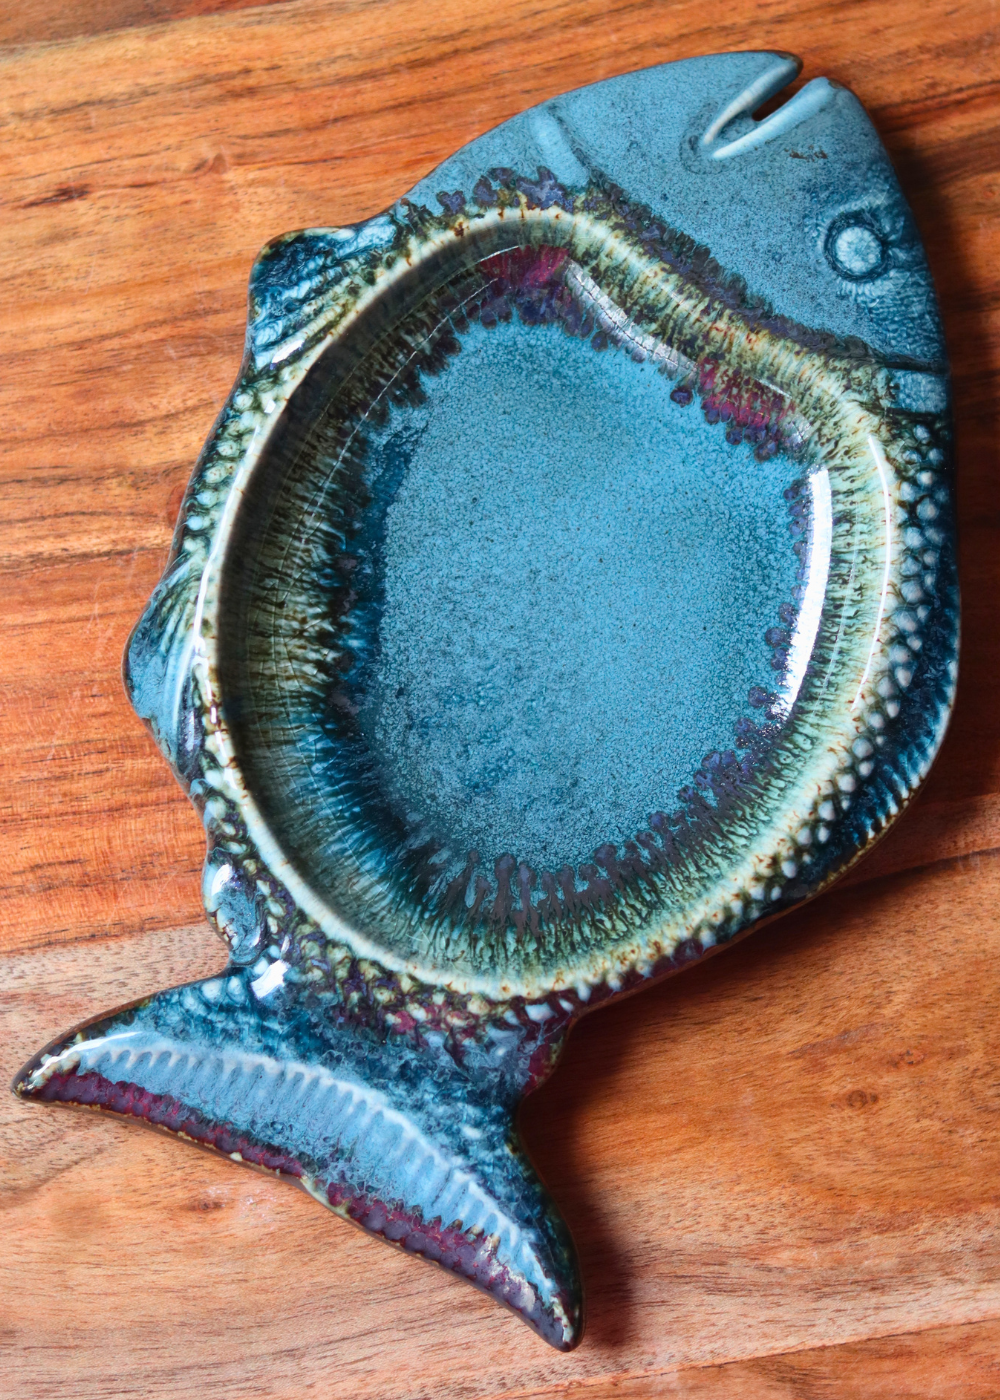 Blue fish platter on a wooden surface